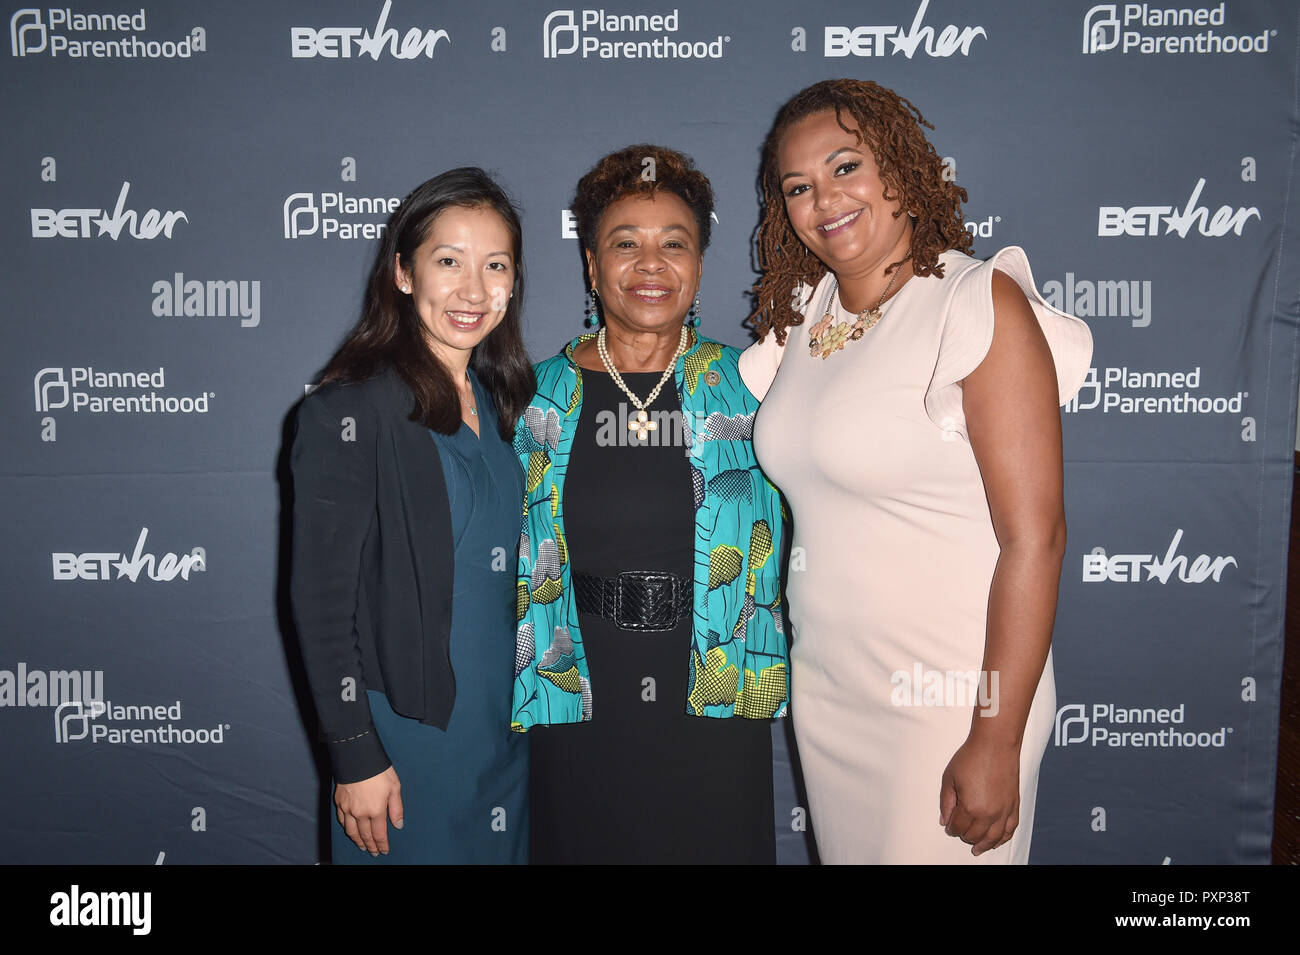 2018 Planned Parenthood Federation of America's Annual Champions of Womens  Health Brunch at the Hamilton Featuring: Dr. Leana Wen, Barbara Lee,  Jacqueline Ayers Where: Washingon DC, District Of Columbia, United States  When: